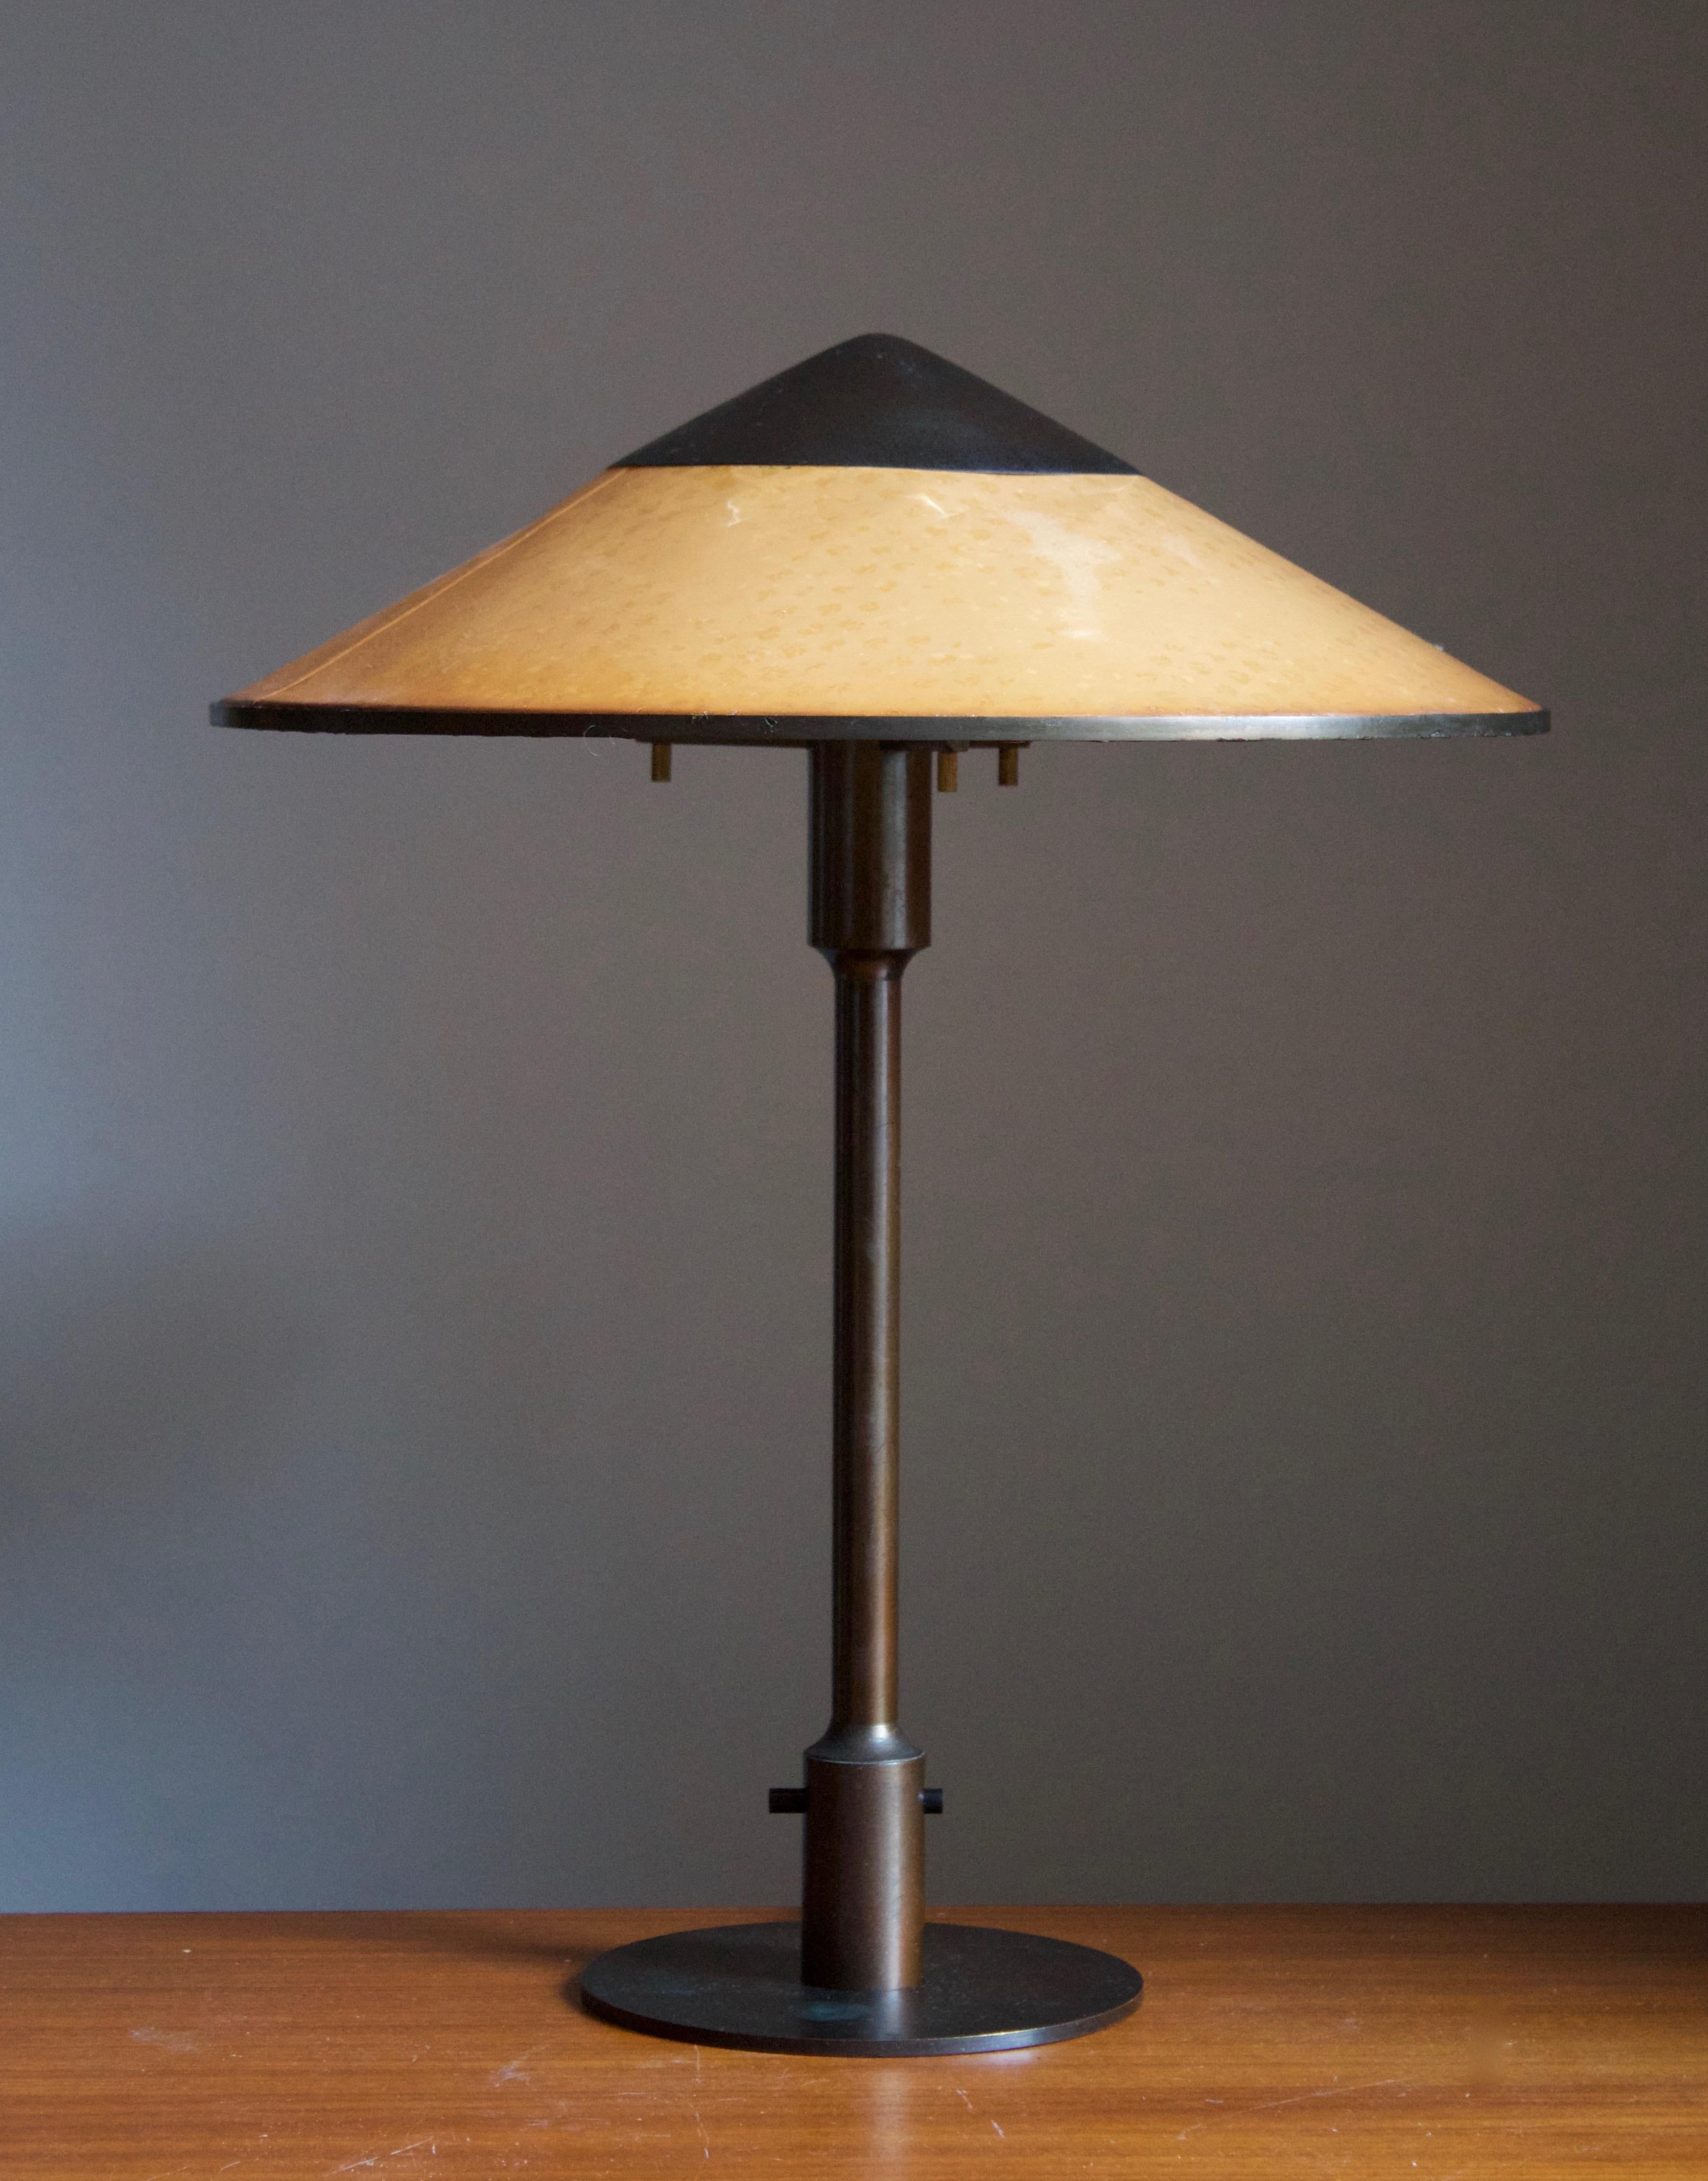 A rare and early table lamp / desk light. Designed by Niels Rasmussen Thykier, Denmark, 1930s. Features a break-through switch typical to early production examples.

In patinated brass and waxed paper screen.

